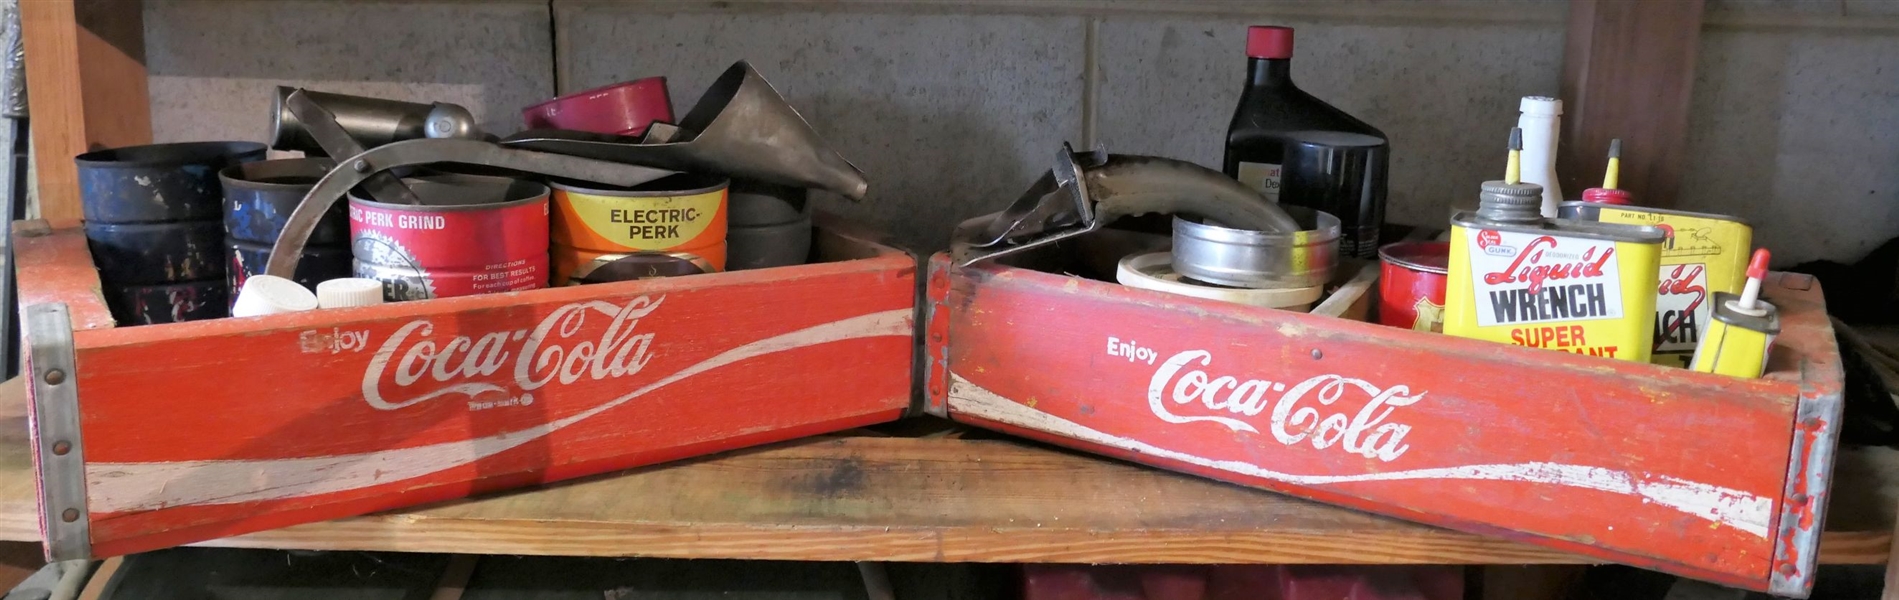 2 Wood Coca Cola Crates Full of Oil Bottles, Liquid Wrench, Nails, and Hardware